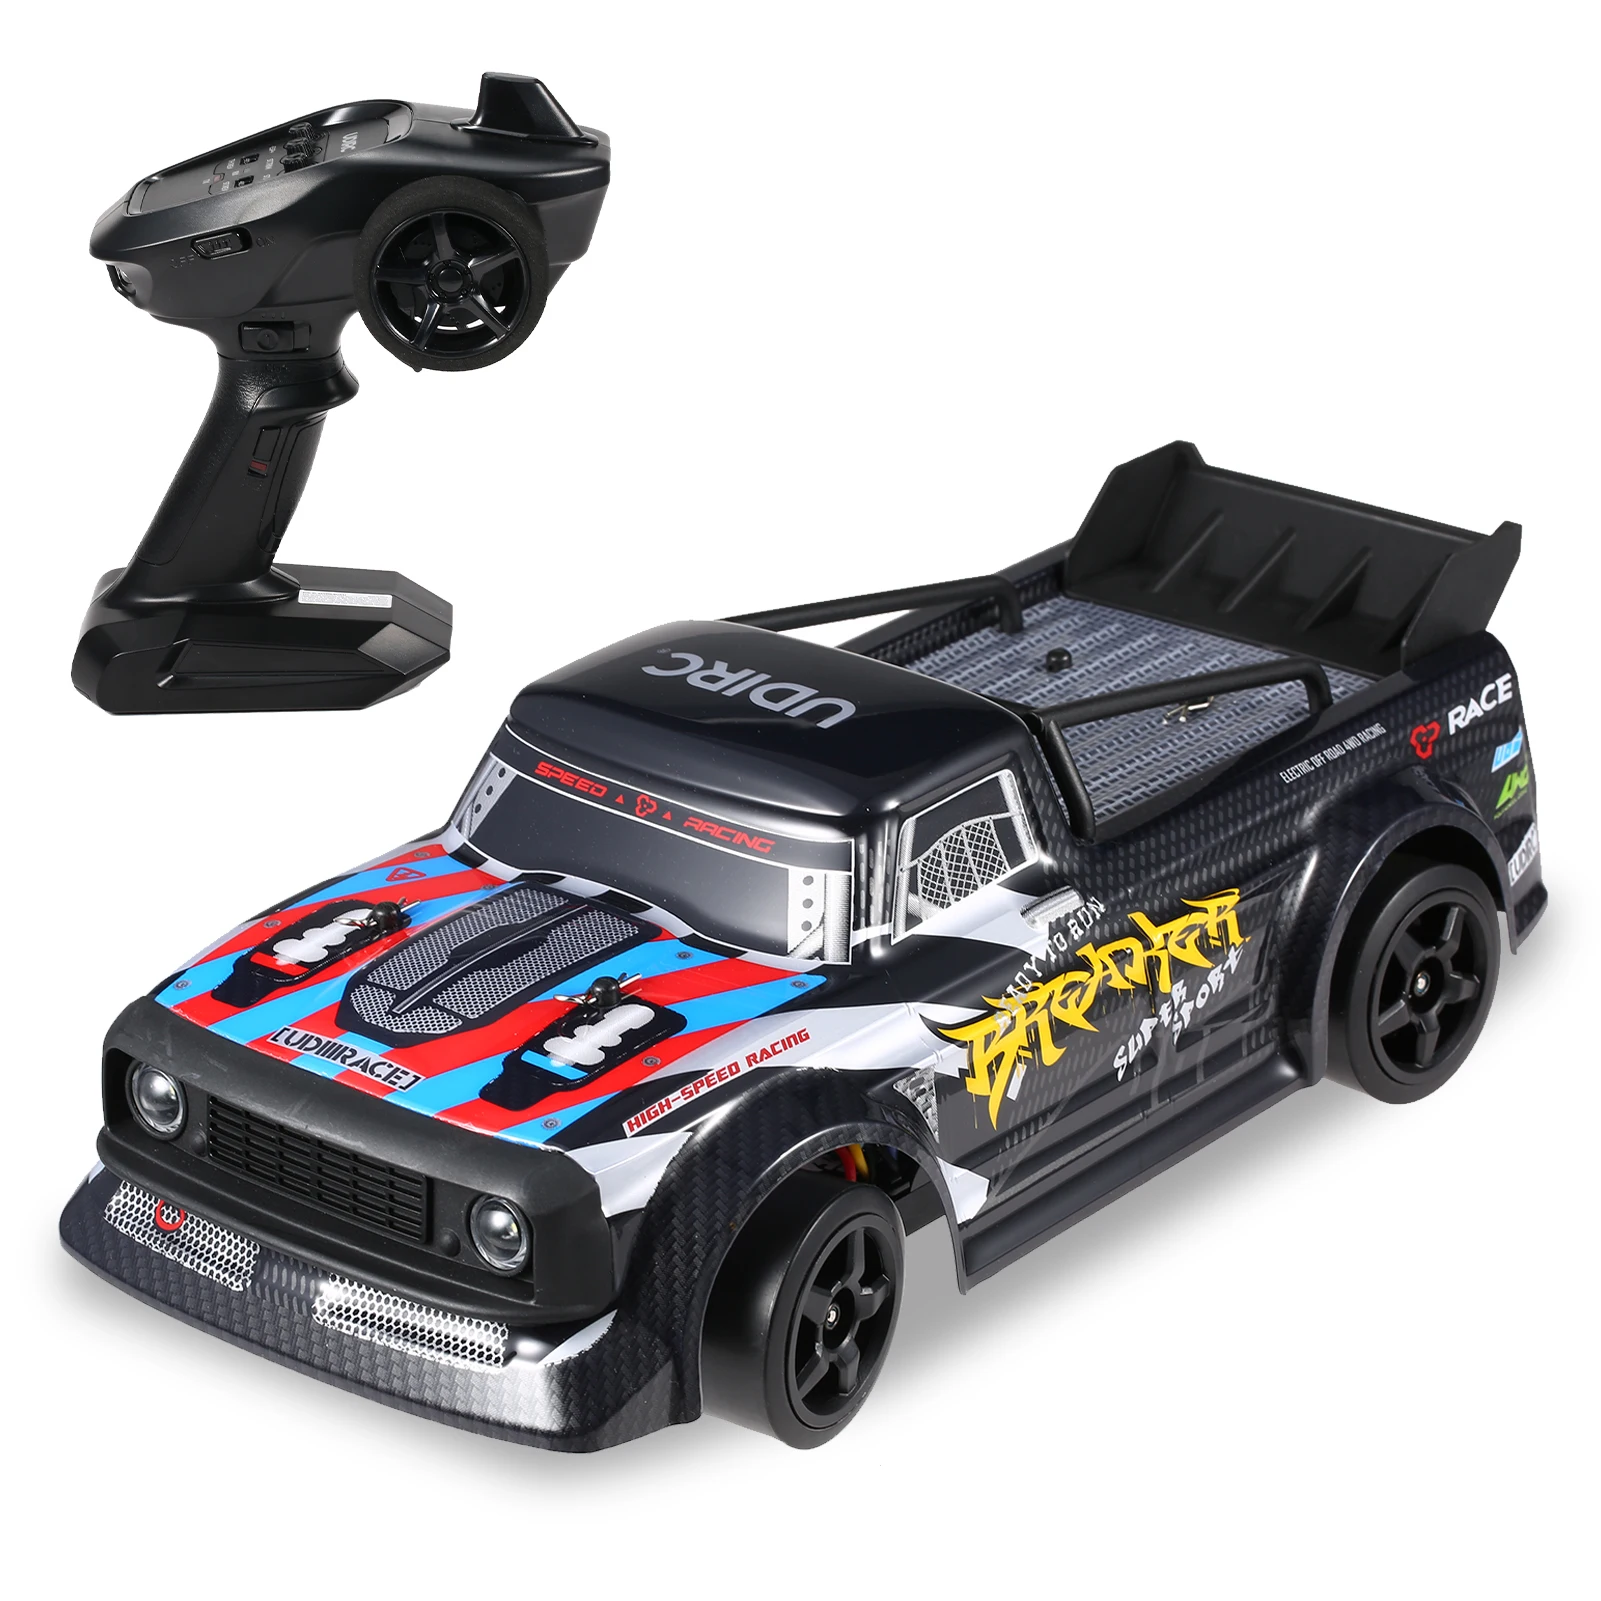 

UdiRC UD1601 RC Drift Car 1/16 RC Car 2.4GHz 4WD 30km/h RC Race Car High Speed Kids Gift RTR with Electronic Stability System